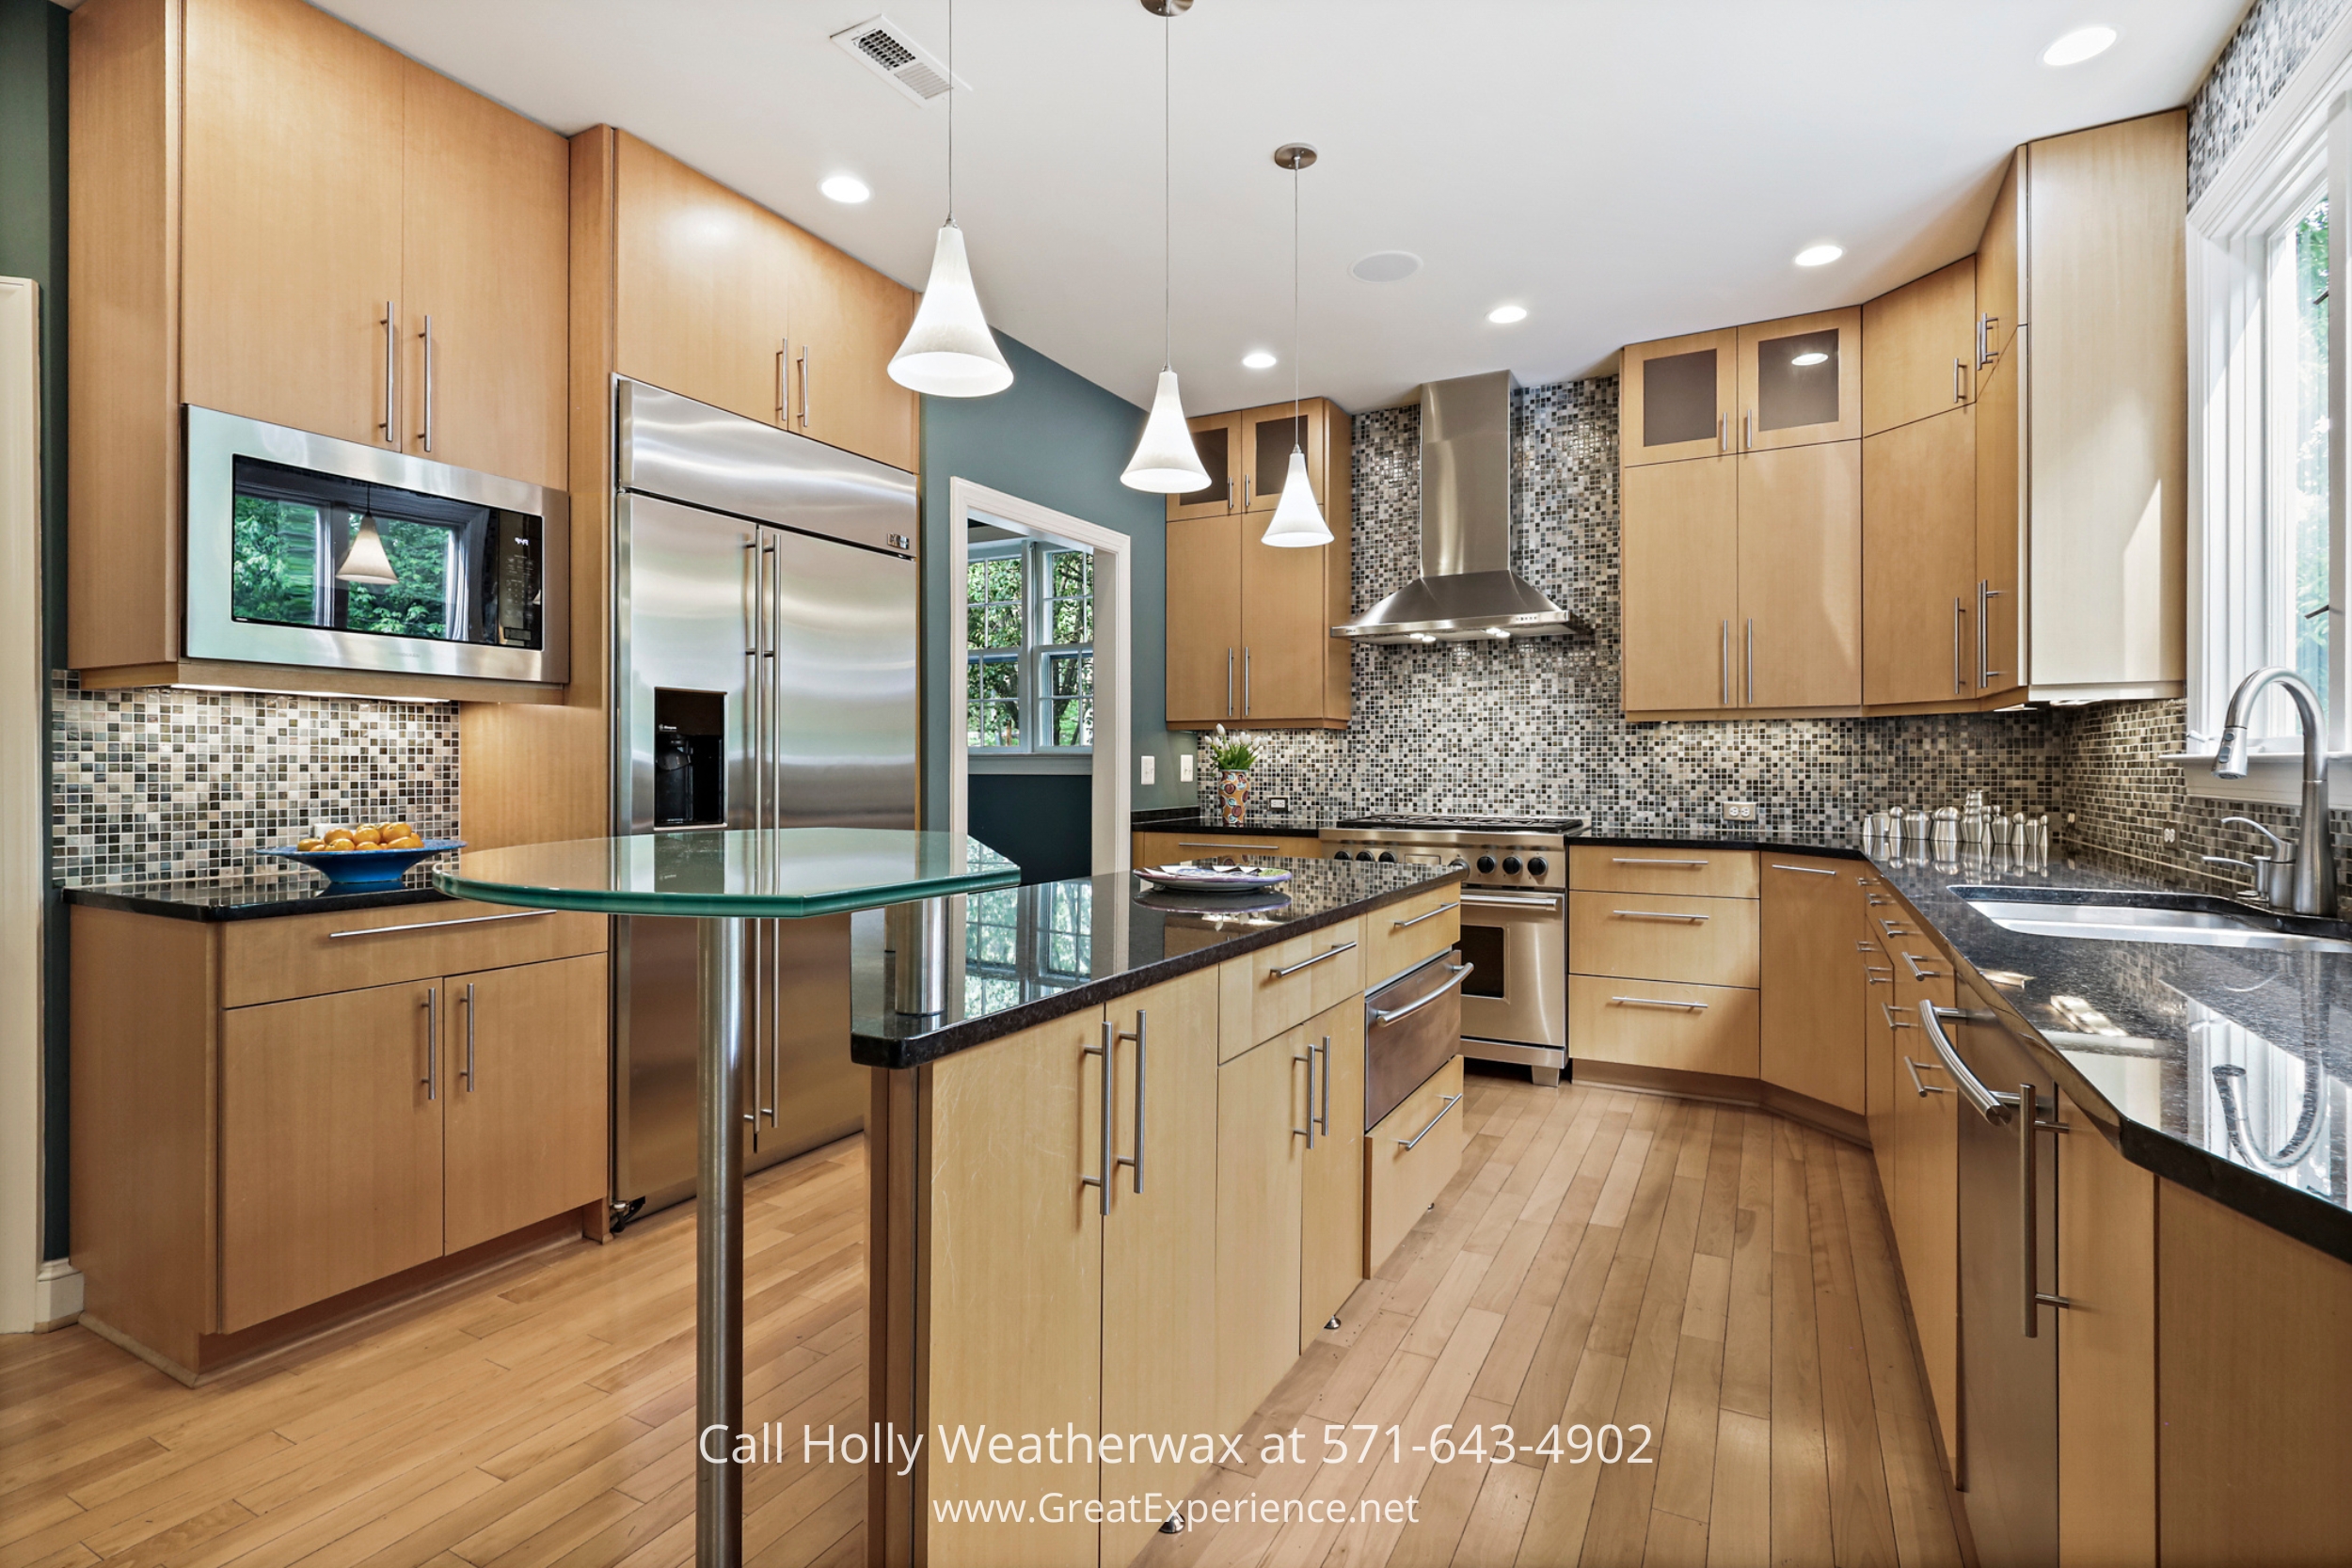 Warm and inviting kitchen with elegant wooden cabinets and sleek stainless steel appliances